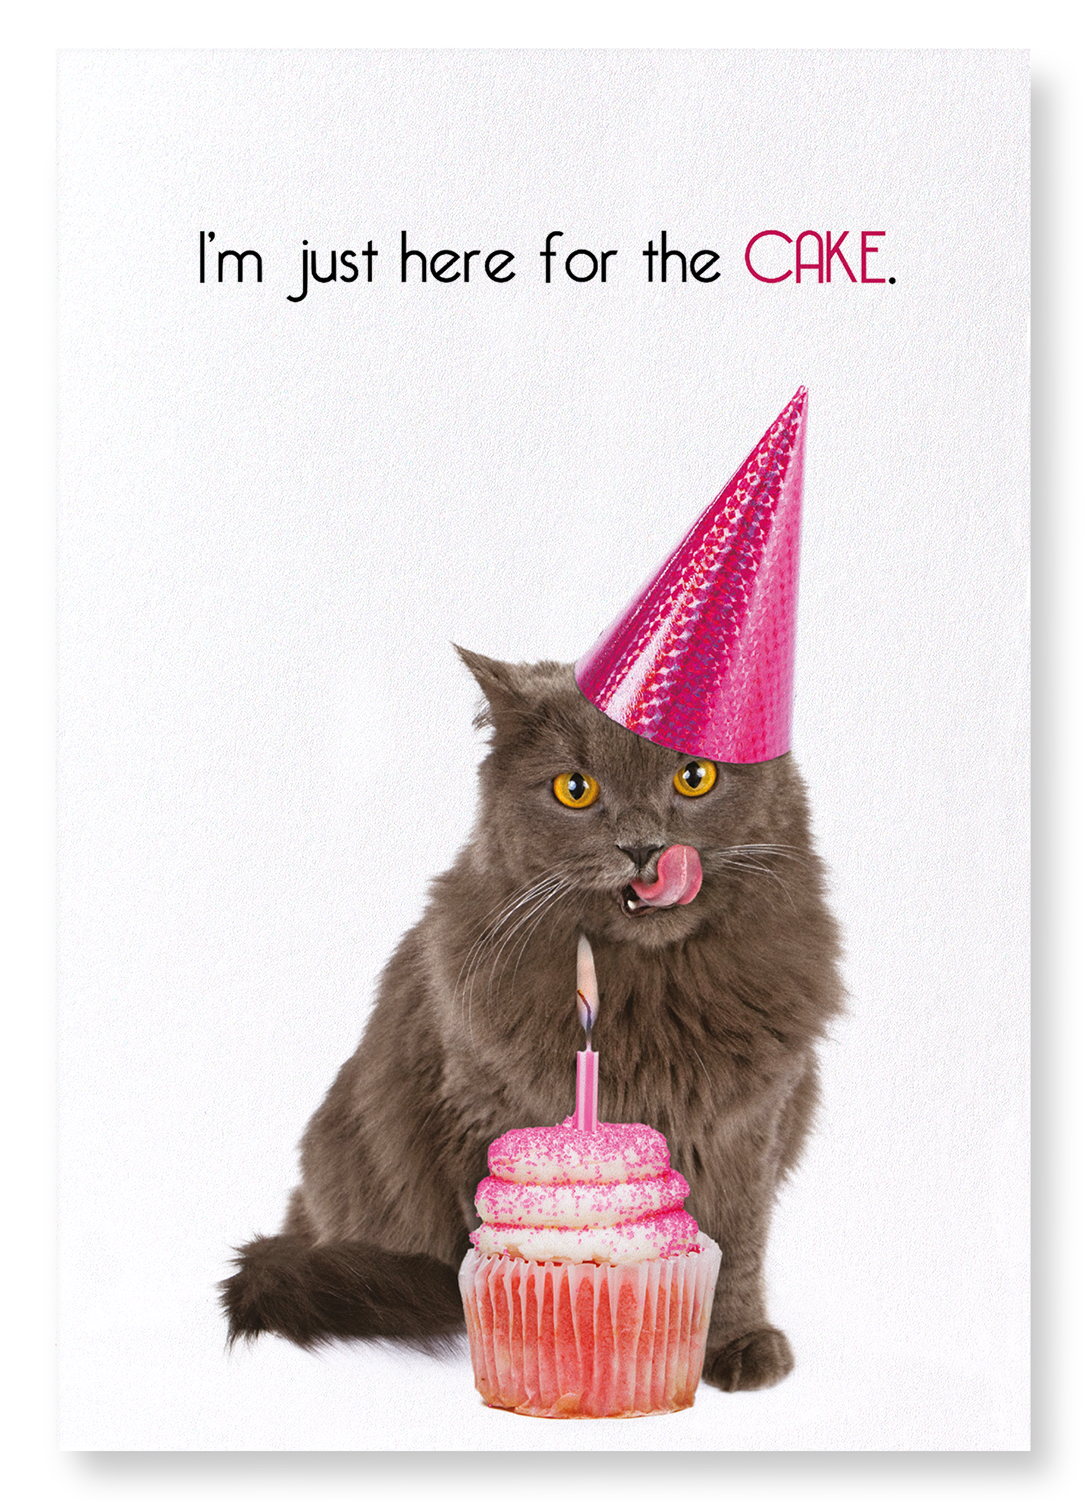 HERE FOR THE CAKE: Funny Animal Art print